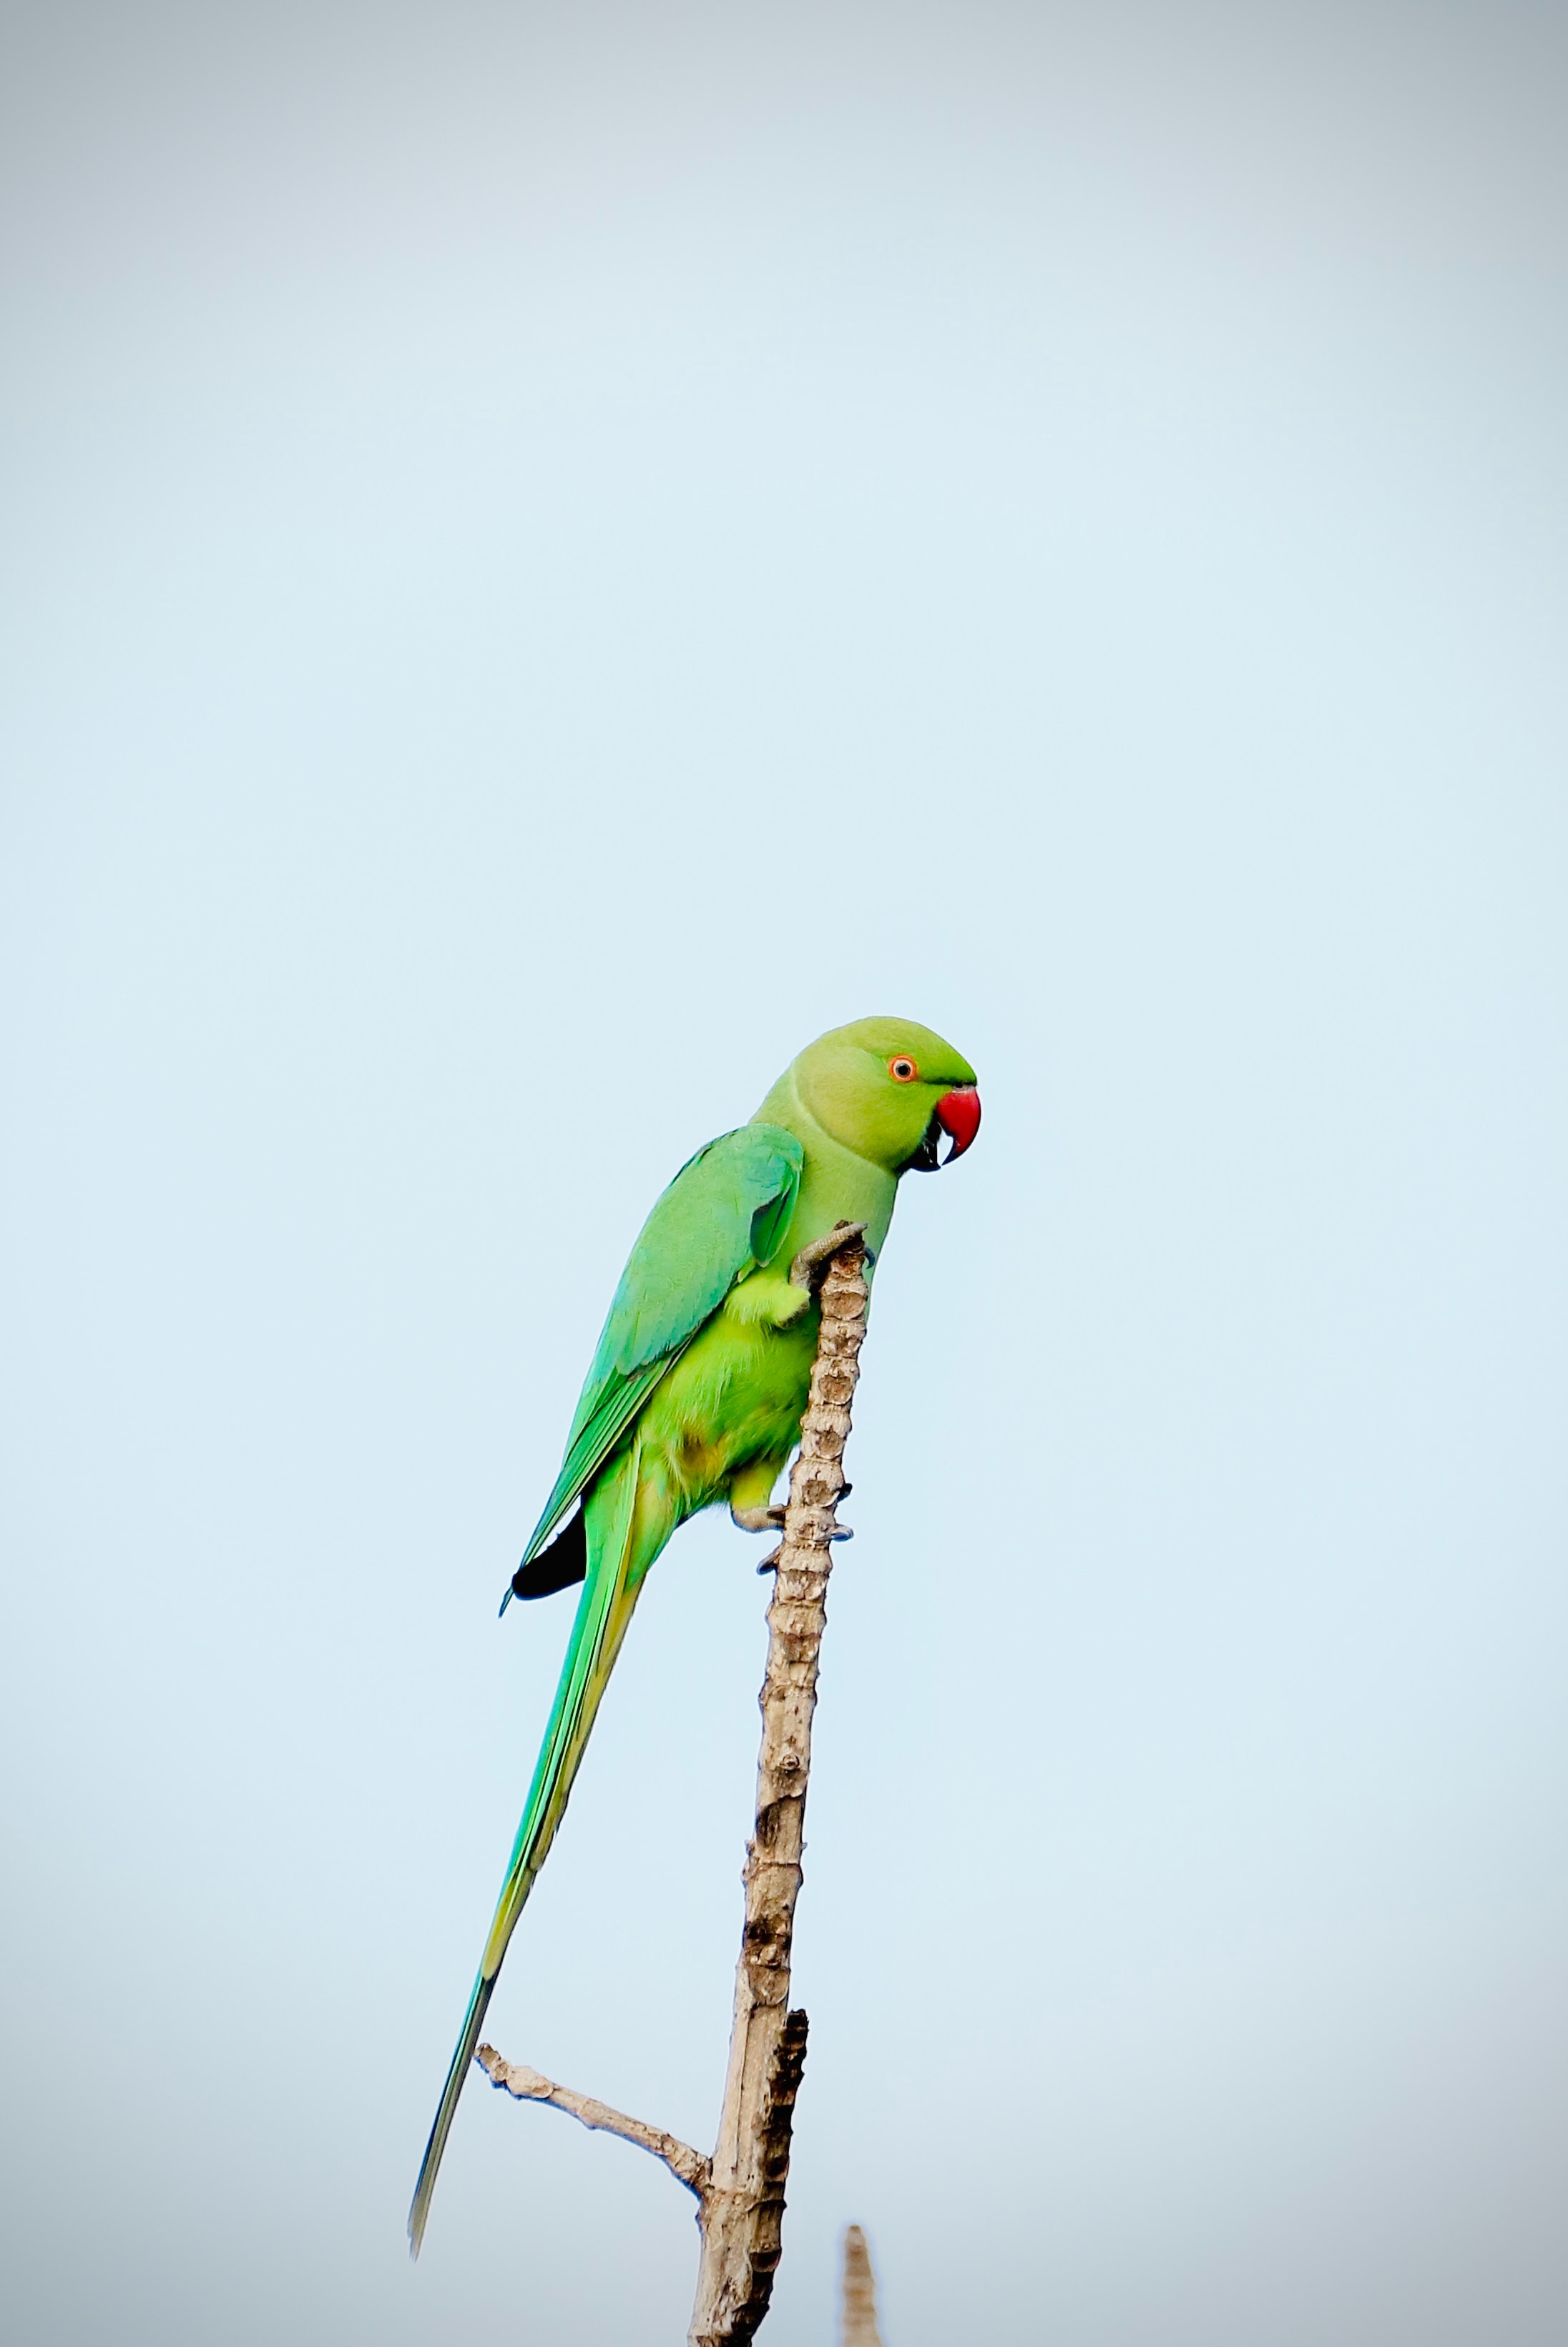 108875 download wallpaper parrots, animals, green, bright, bird, branch screensavers and pictures for free